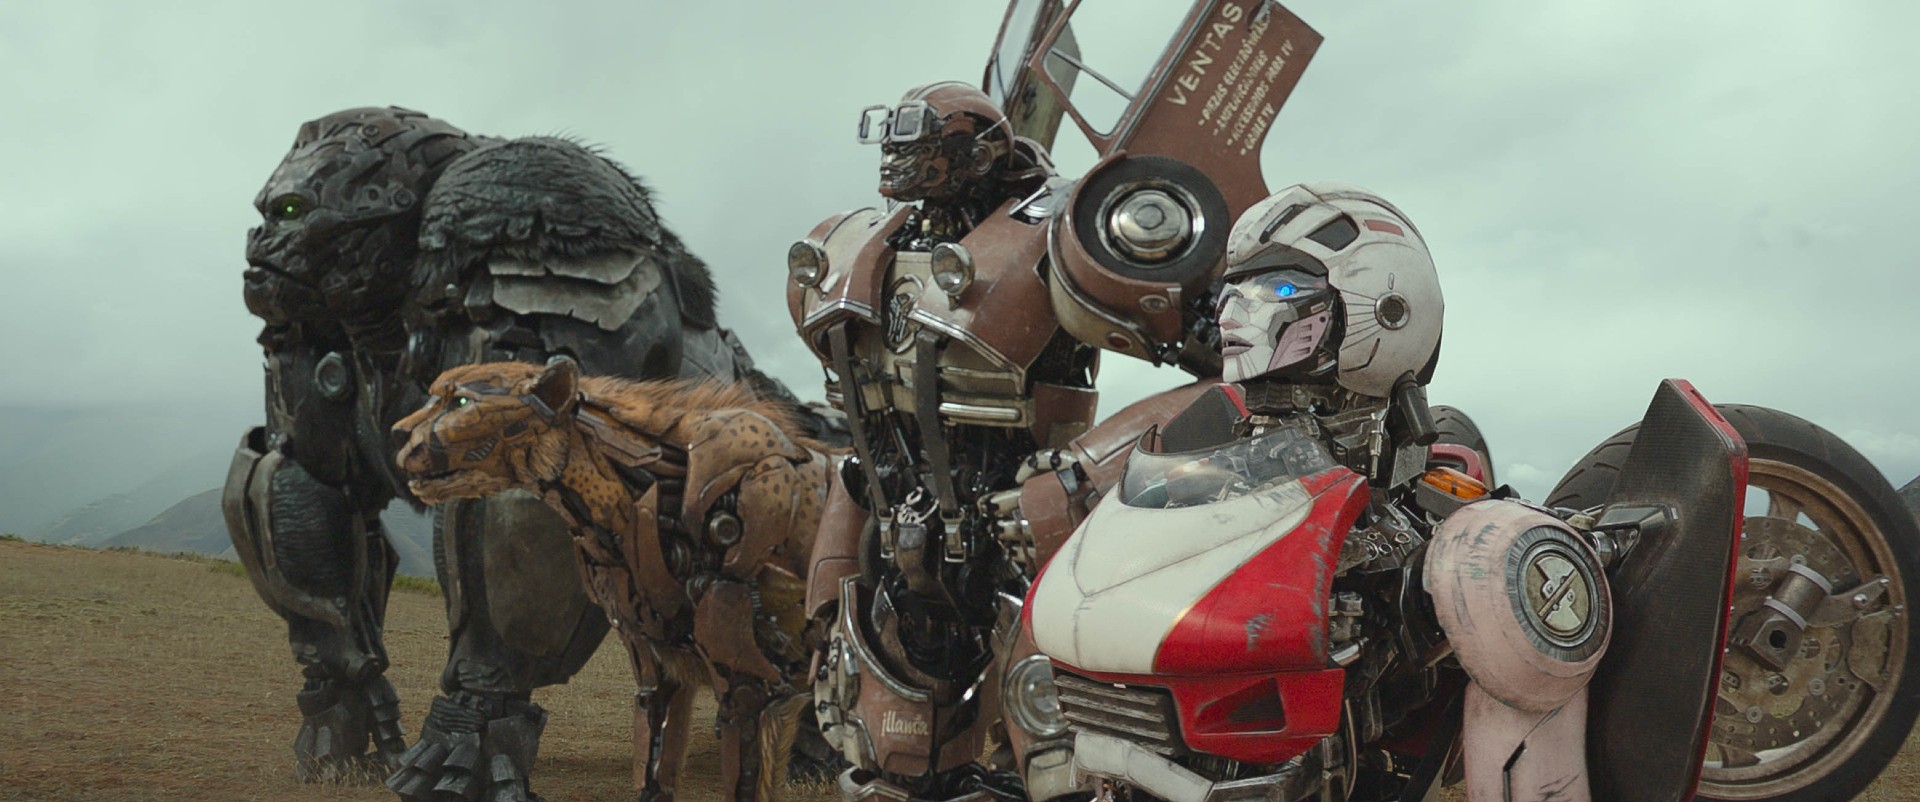 The Maximals in Transformers: Rise of the Beasts from Paramount Pictures